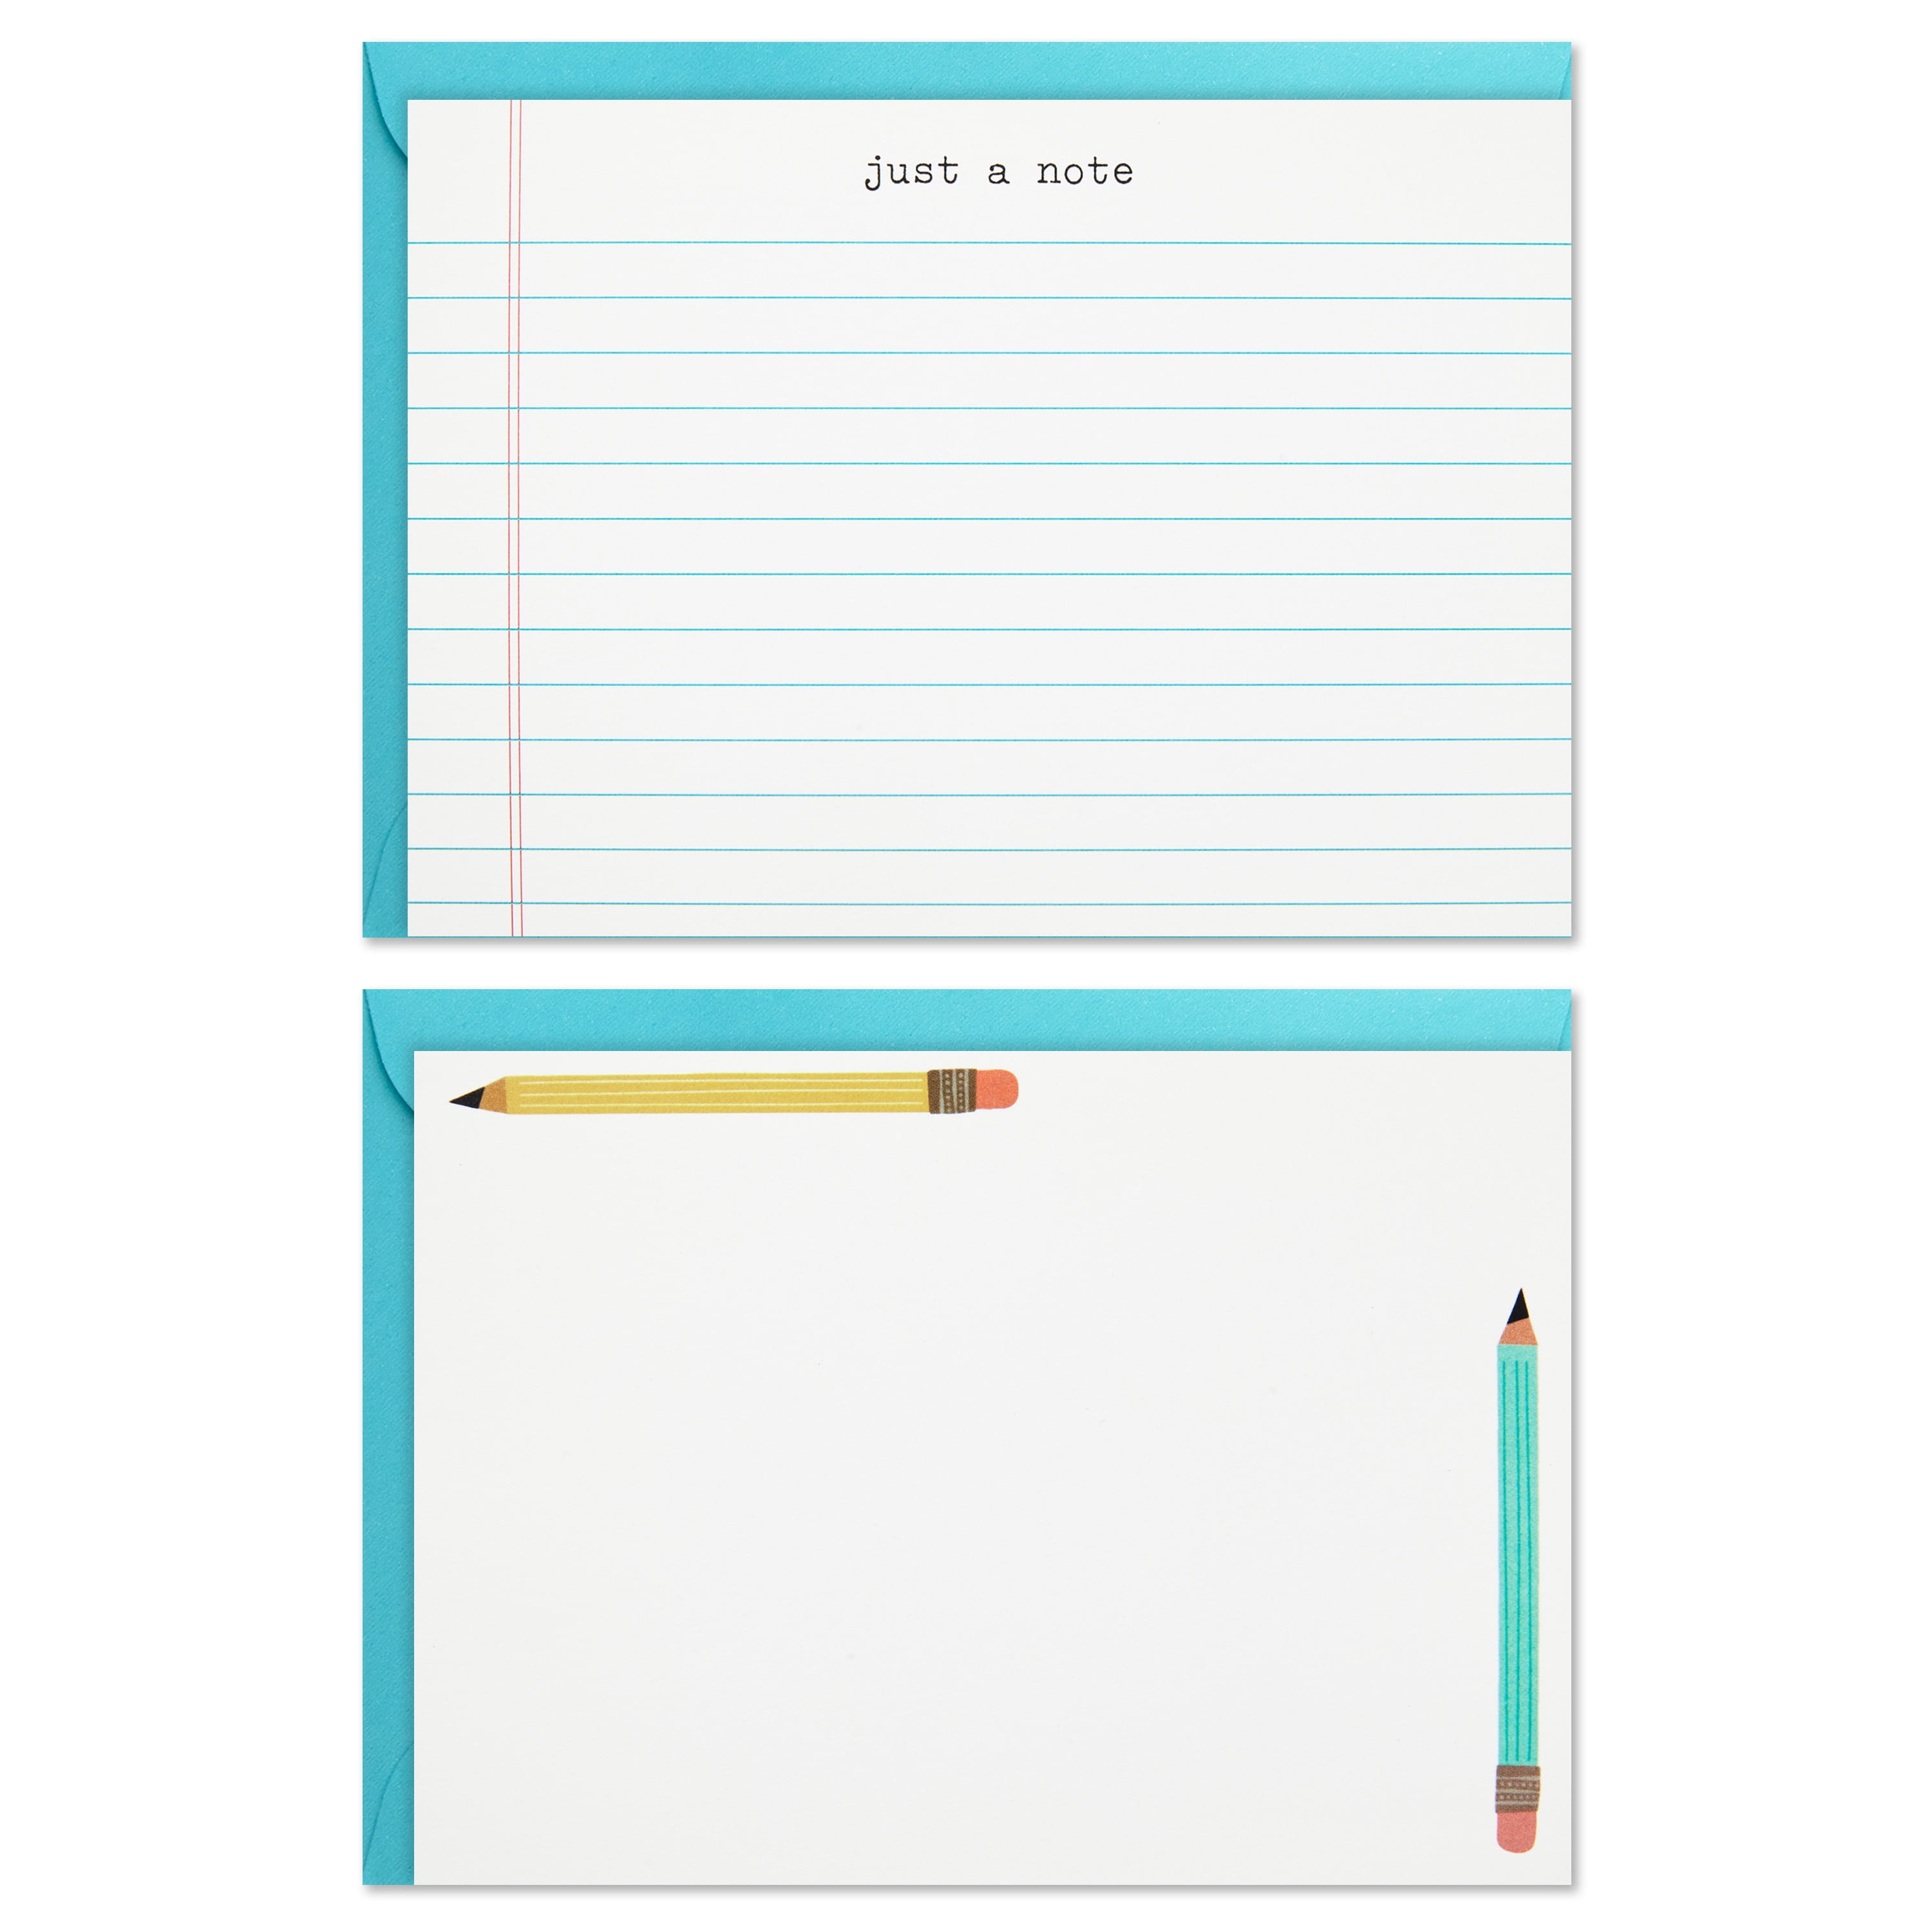 Hallmark Flat Note Cards in Caddy, Ruled Paper and Pencil Designs, 40 ct.